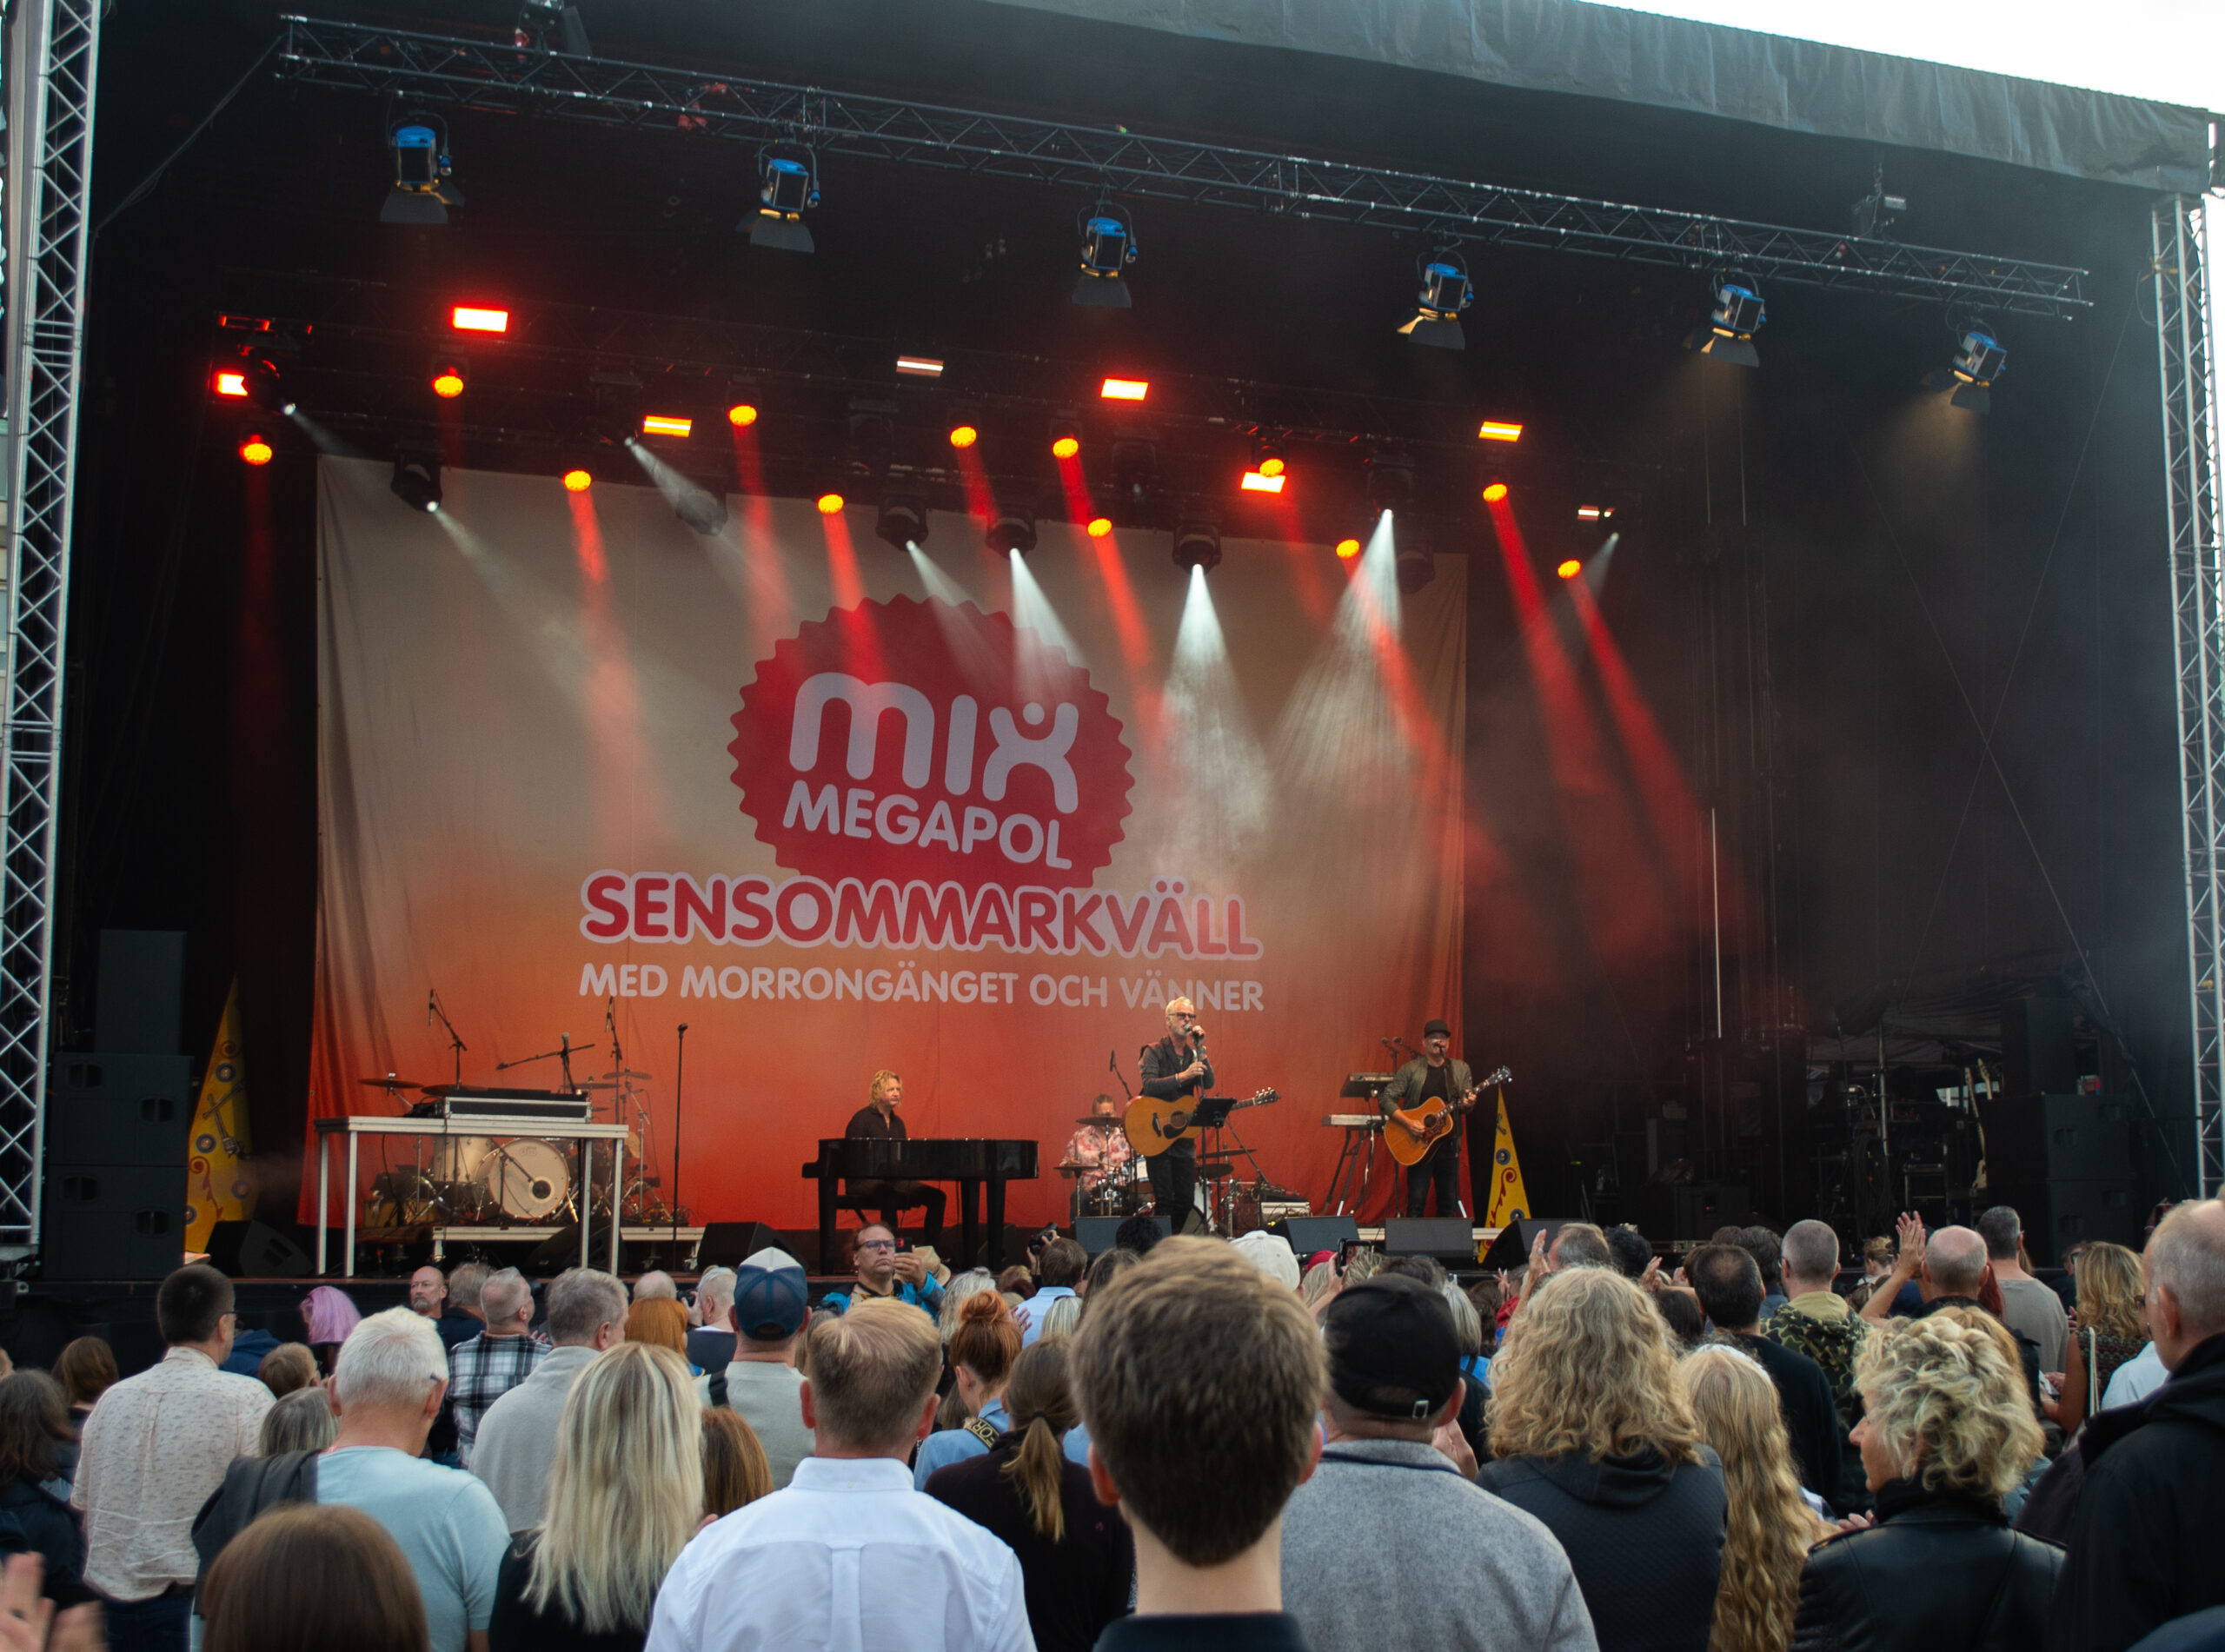 Uno Svenningsson plays on a stage with a band. In the background of the stage hangs a sign that says Mix Megapol Sensommarkväll (eng: Late Summer Night). In the foreground, the audience can be seen enjoying the concert.